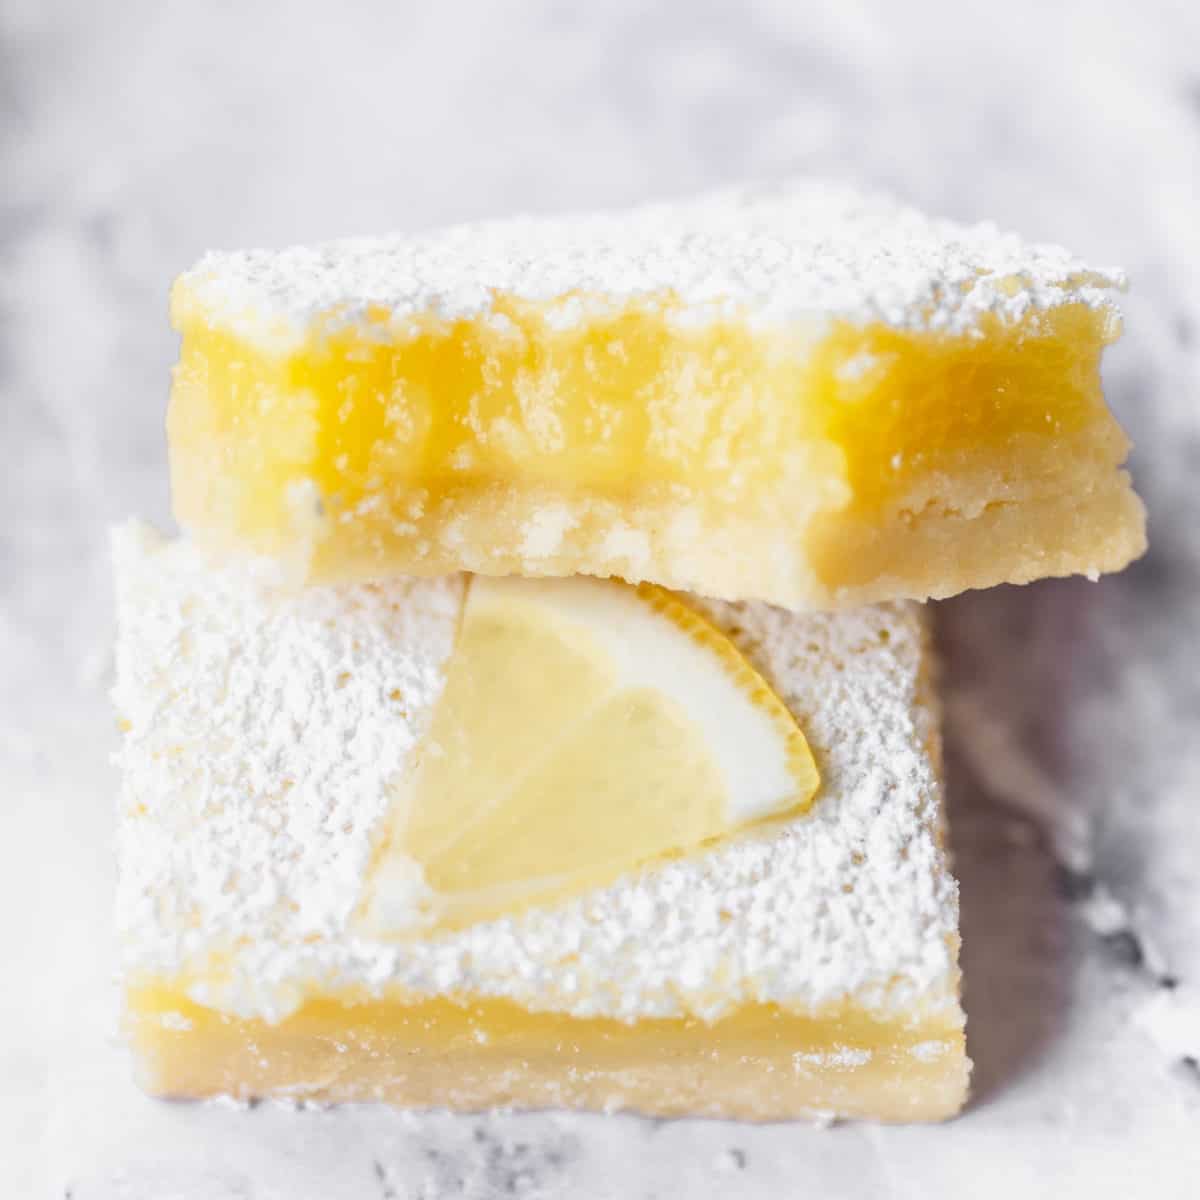 A lemon bar up close with a bite taken out of it.